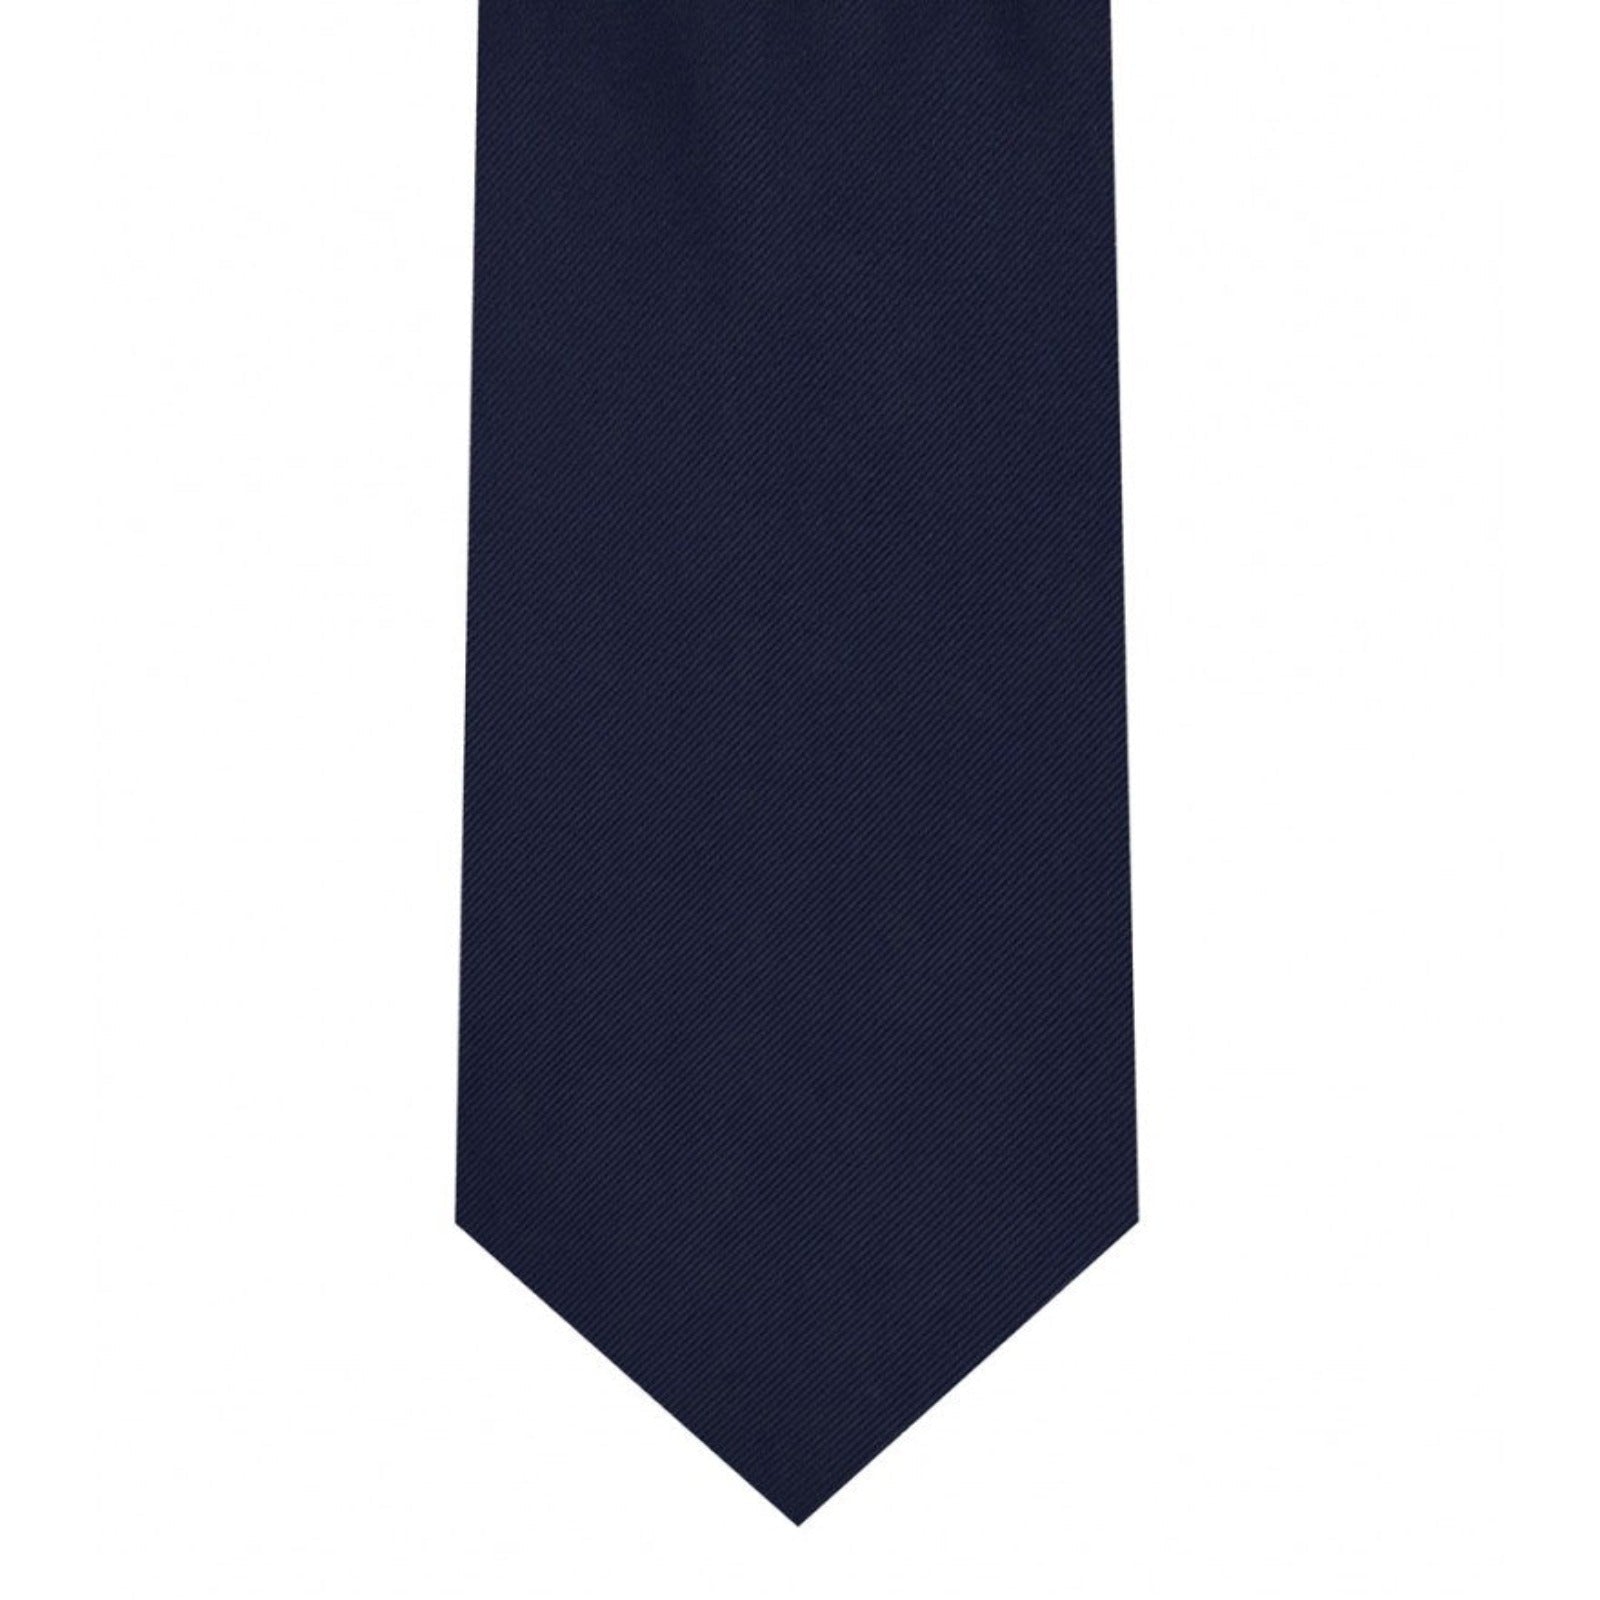 Classic Dark Navy Tie Skinny width 2.75 inches With Matching Pocket Square | KCT Menswear